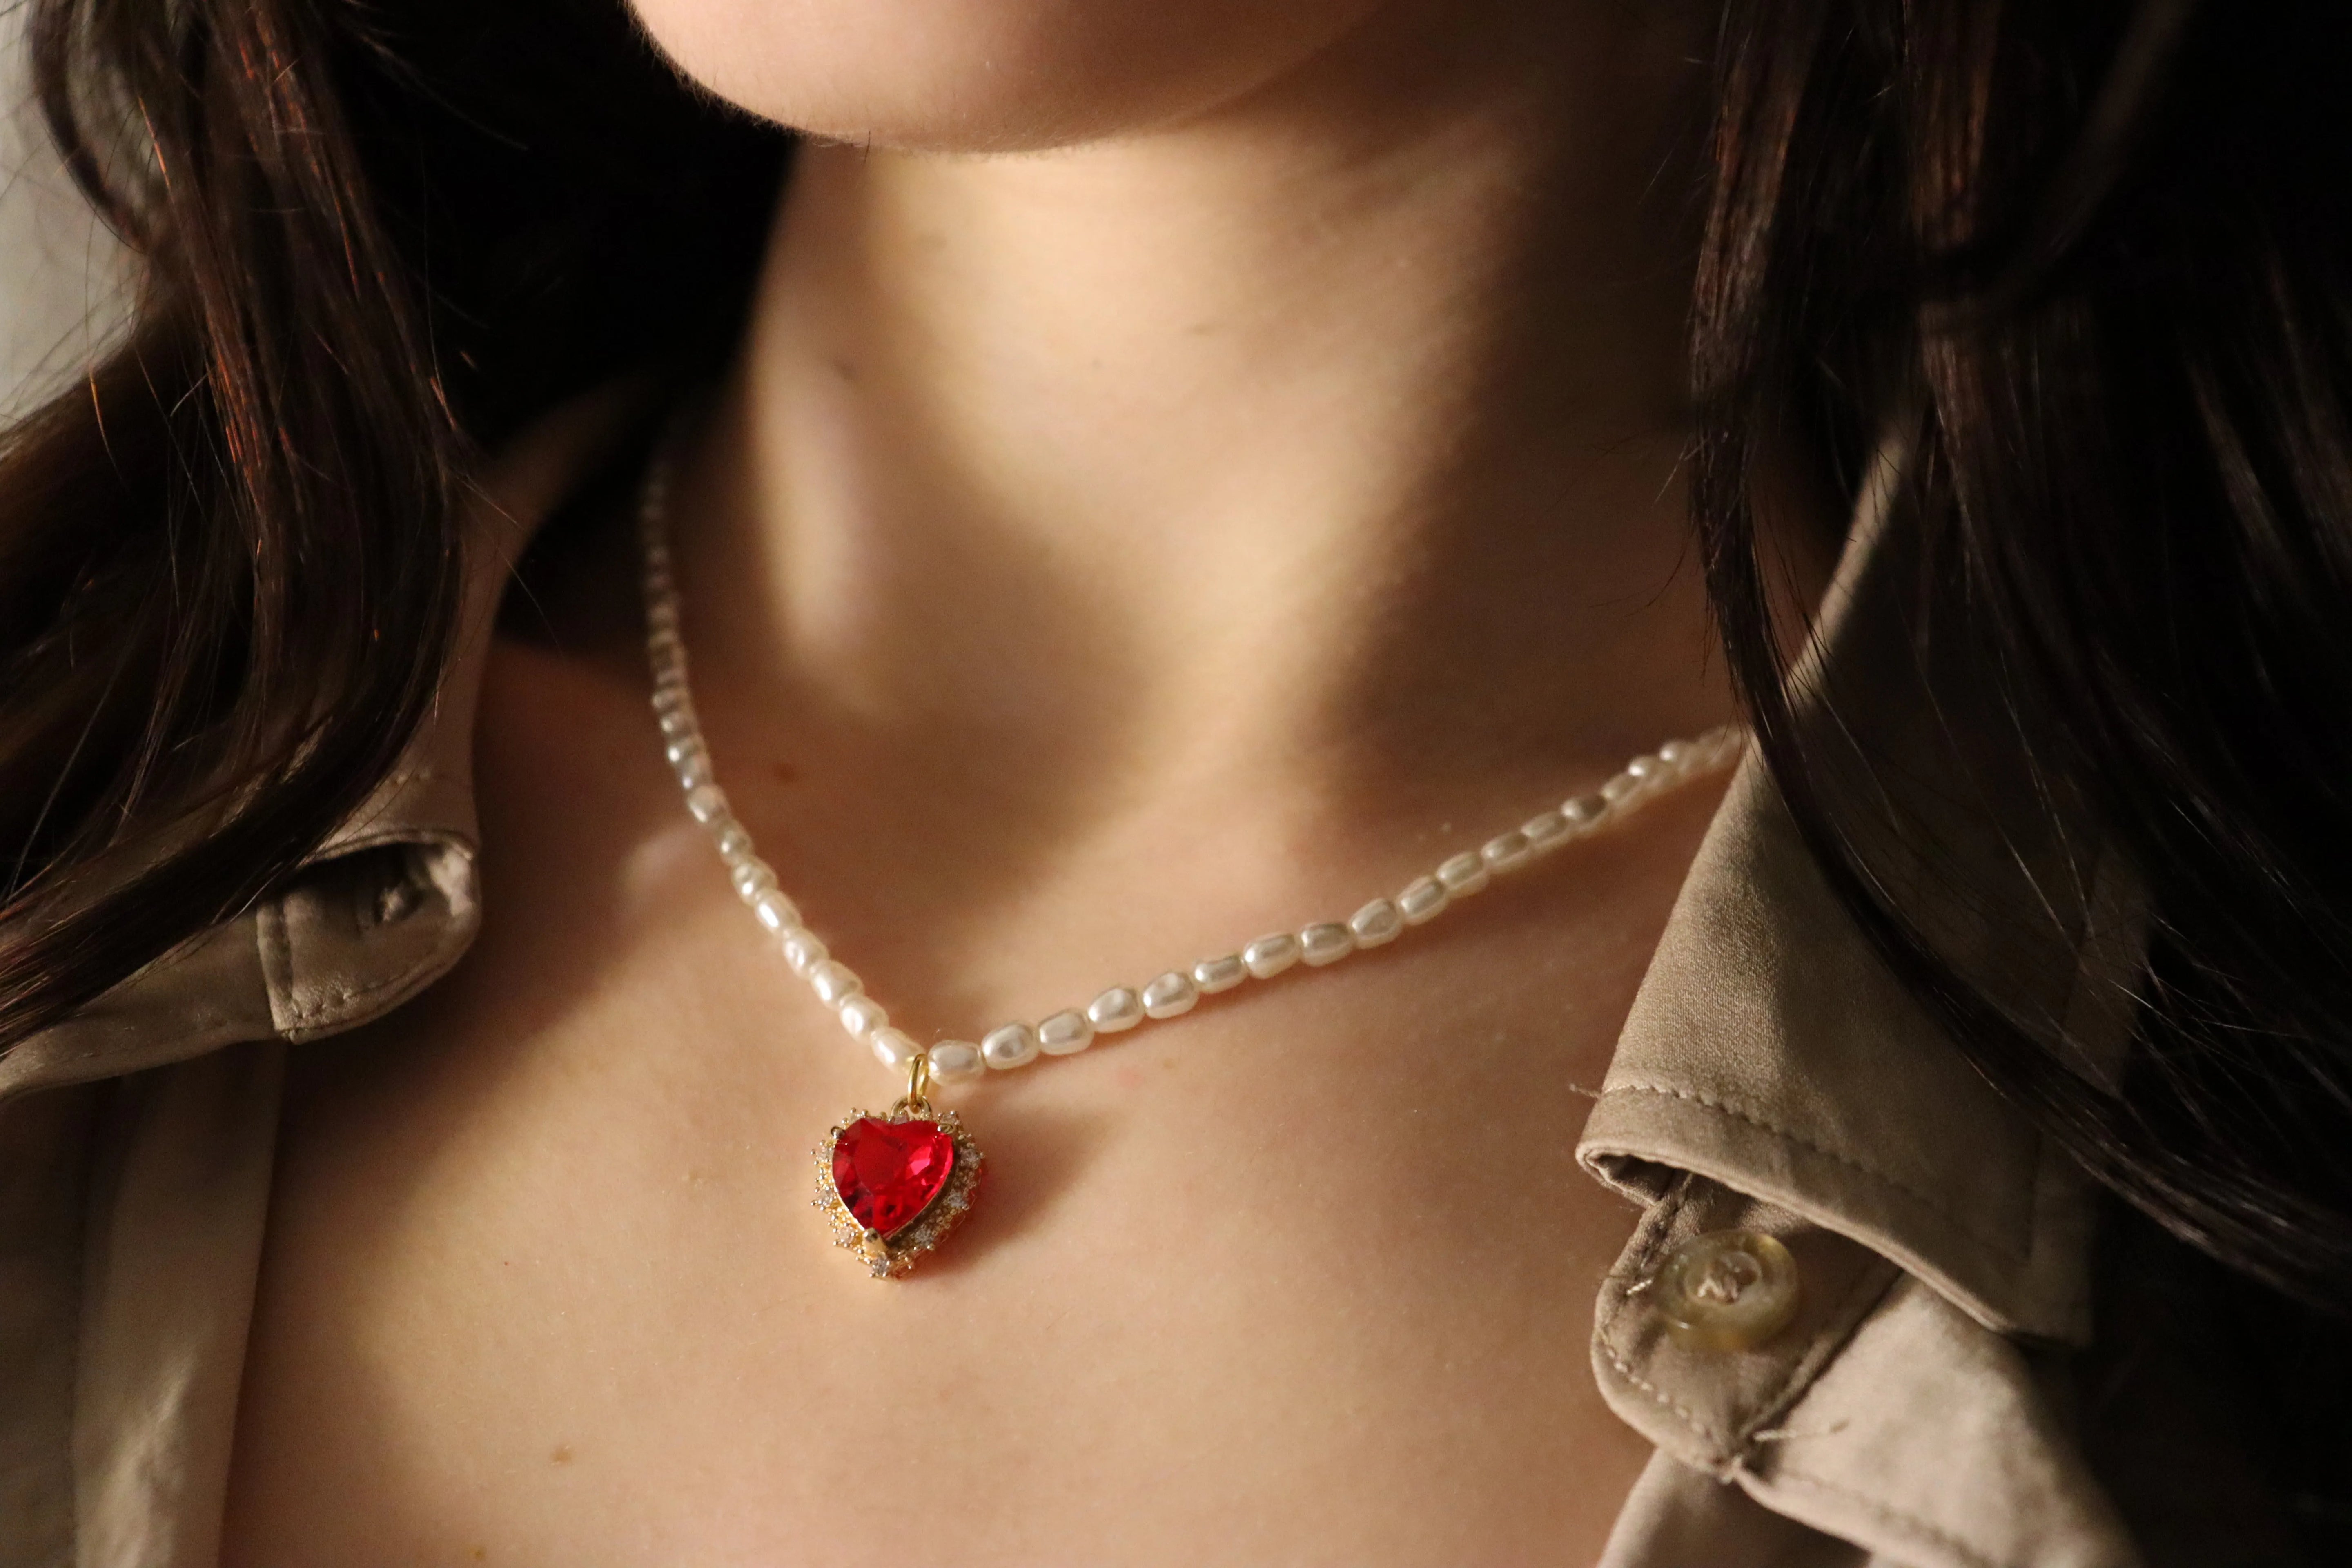 Love Necklace product images.